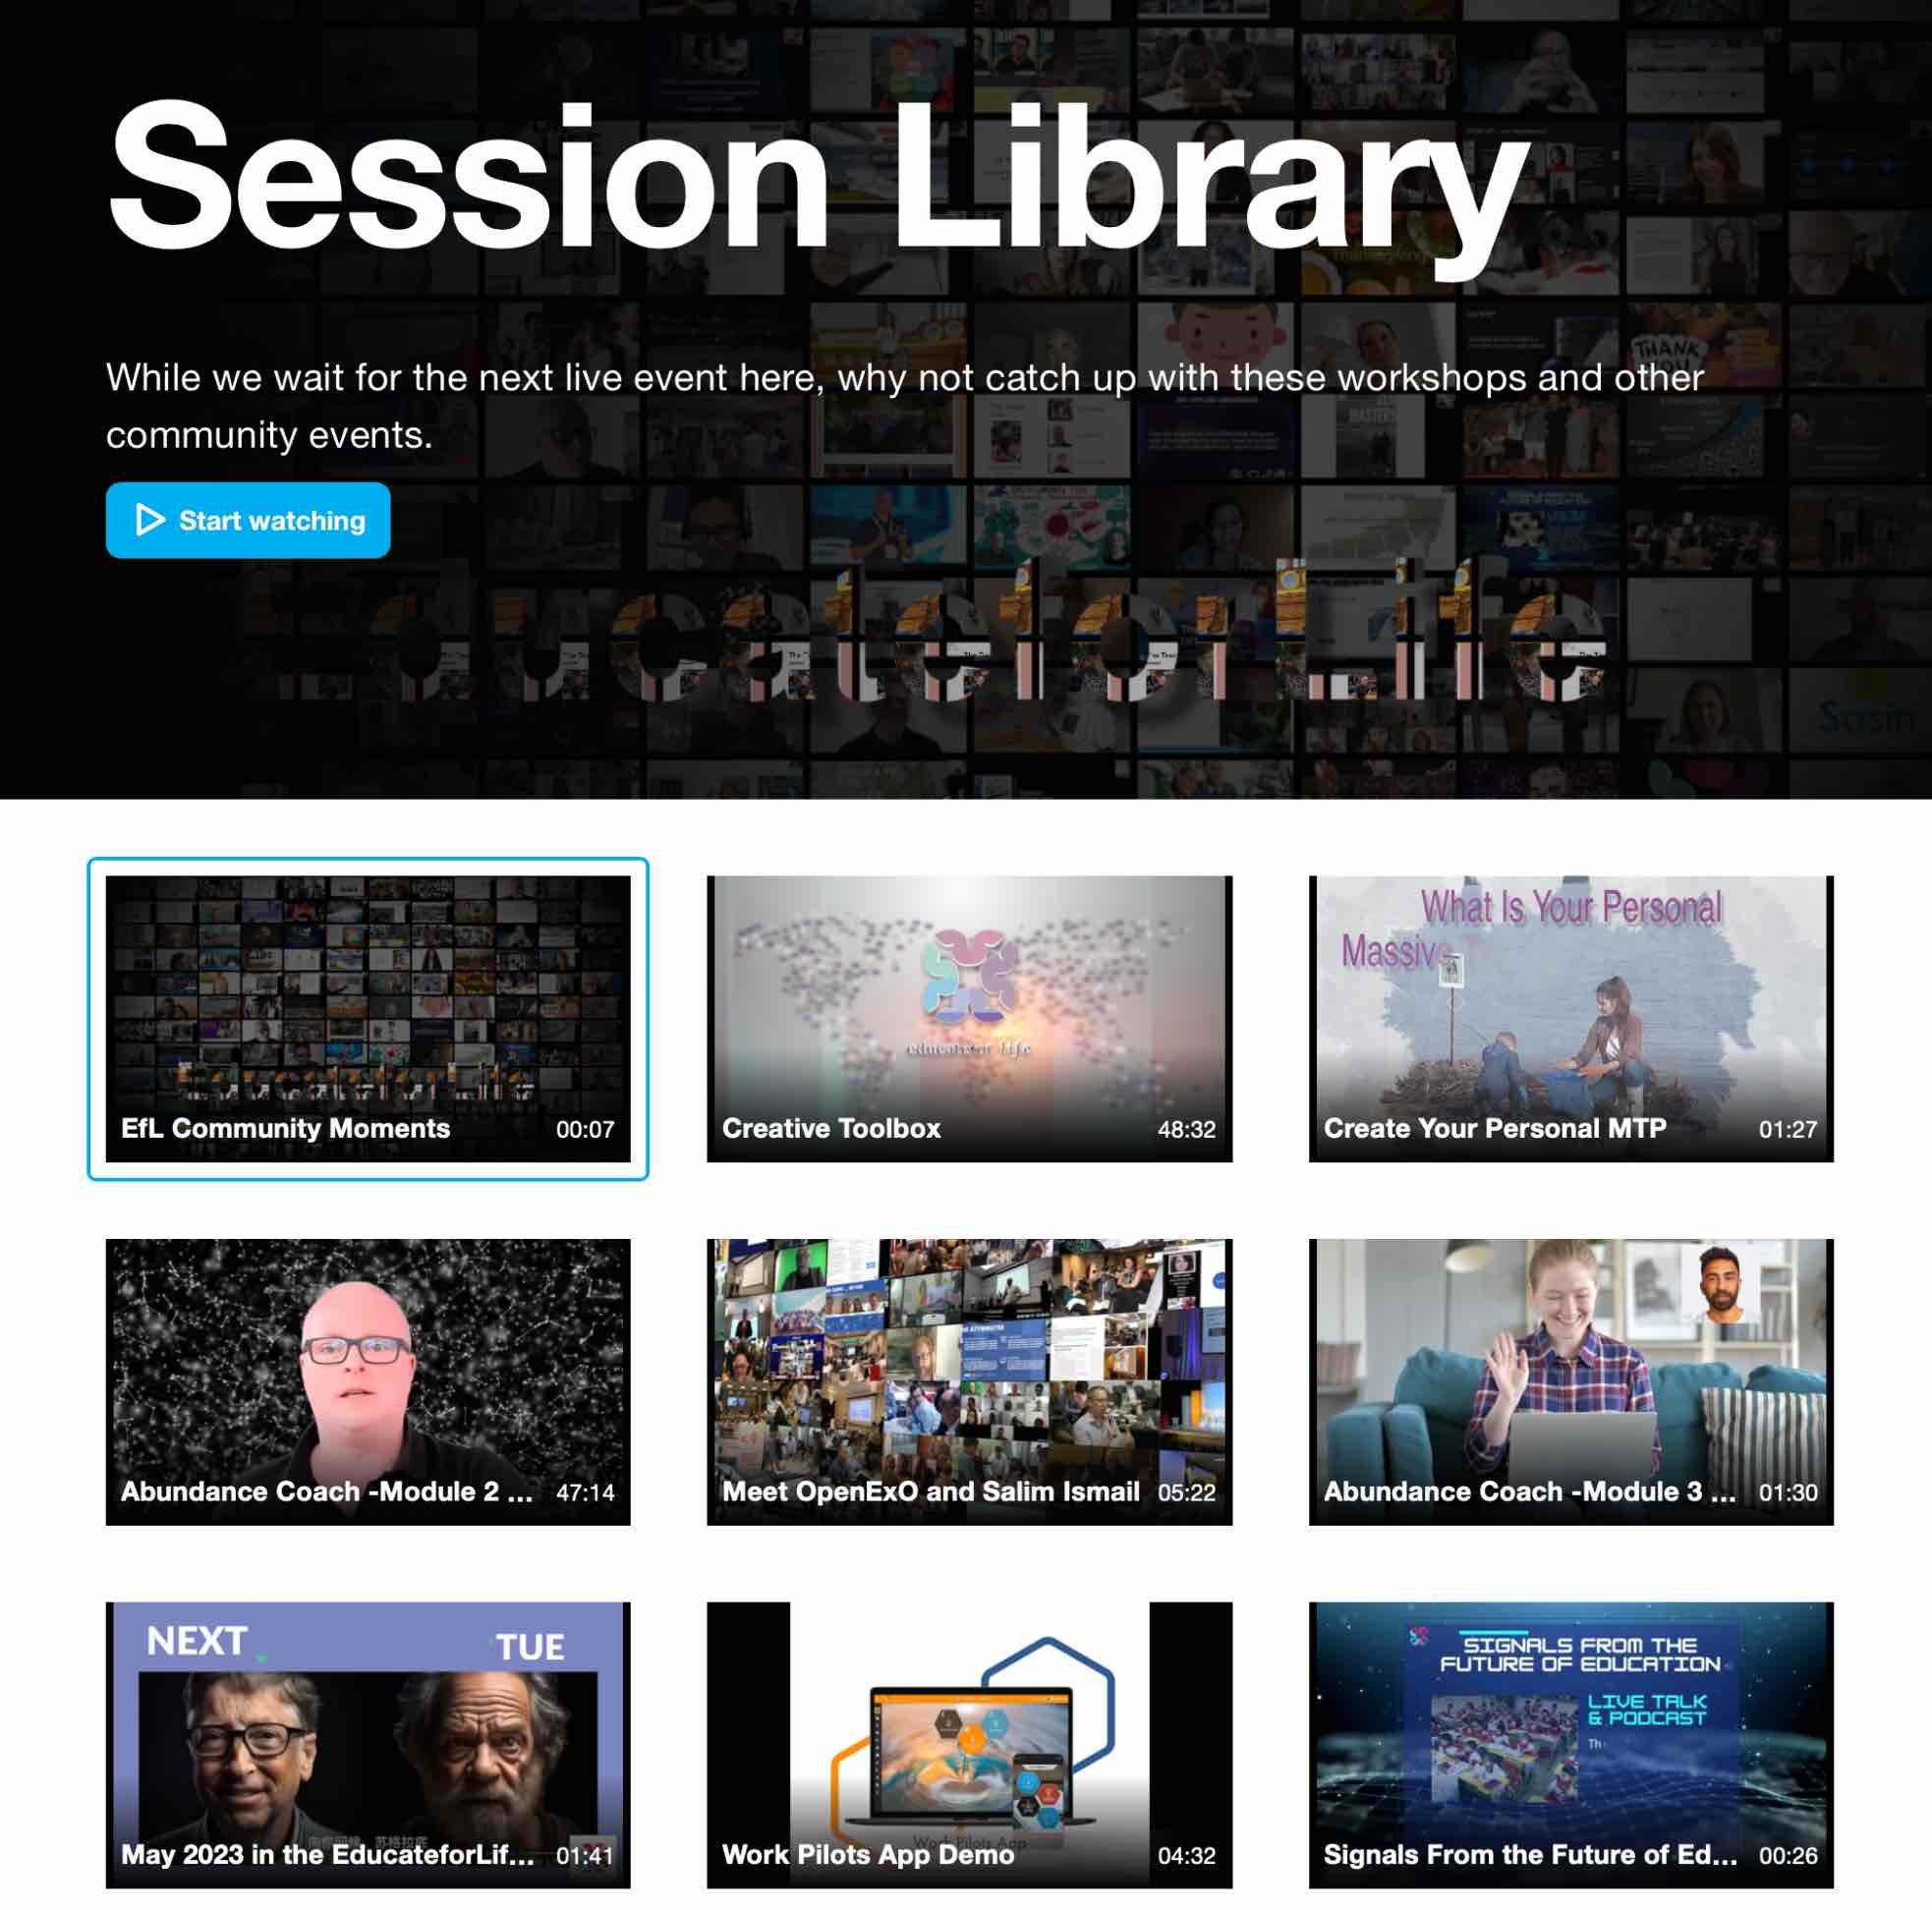 Session Library